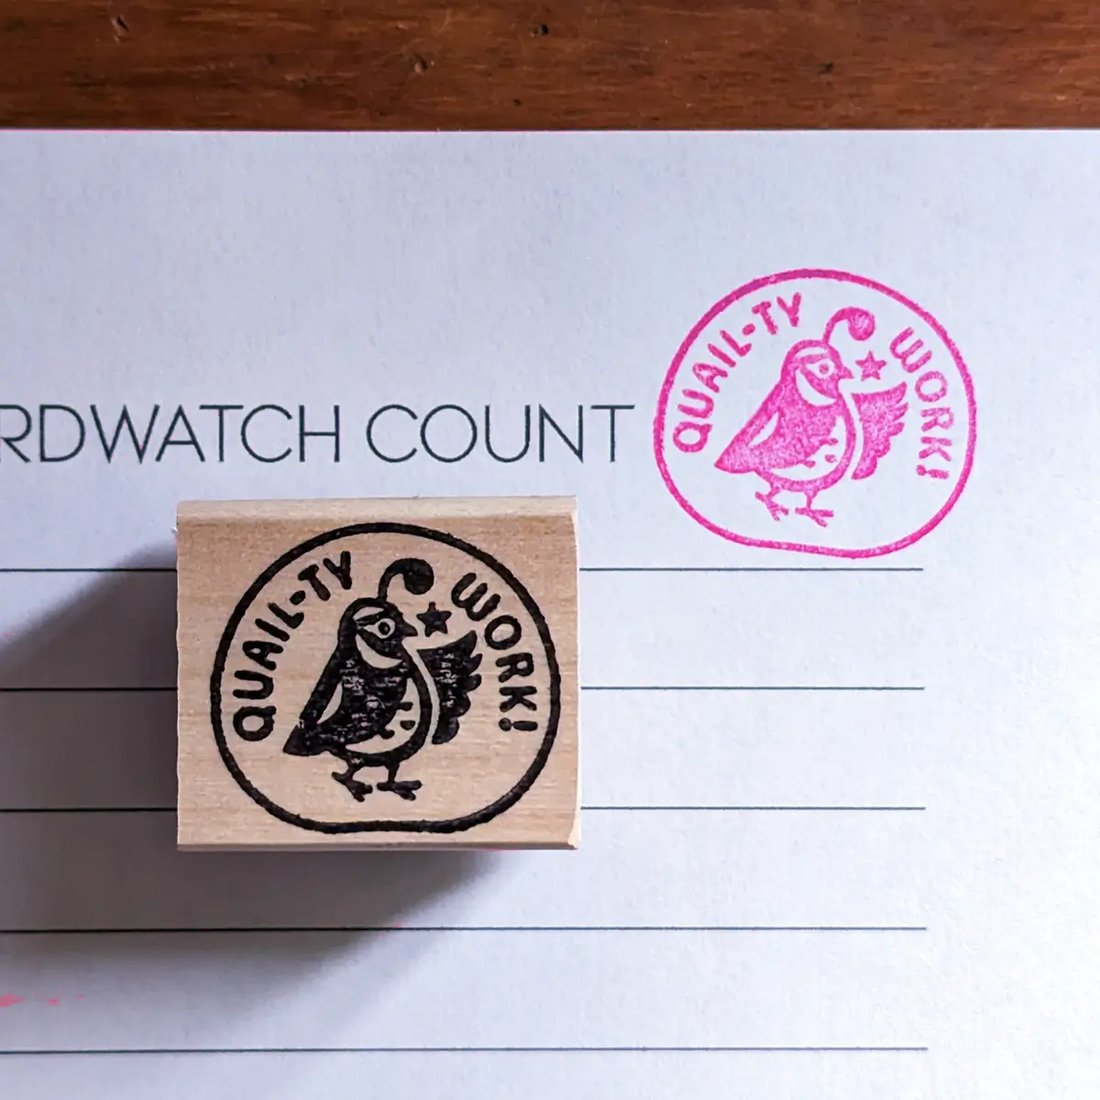 Image of “Quail-ty Work!” Rubber Stamp